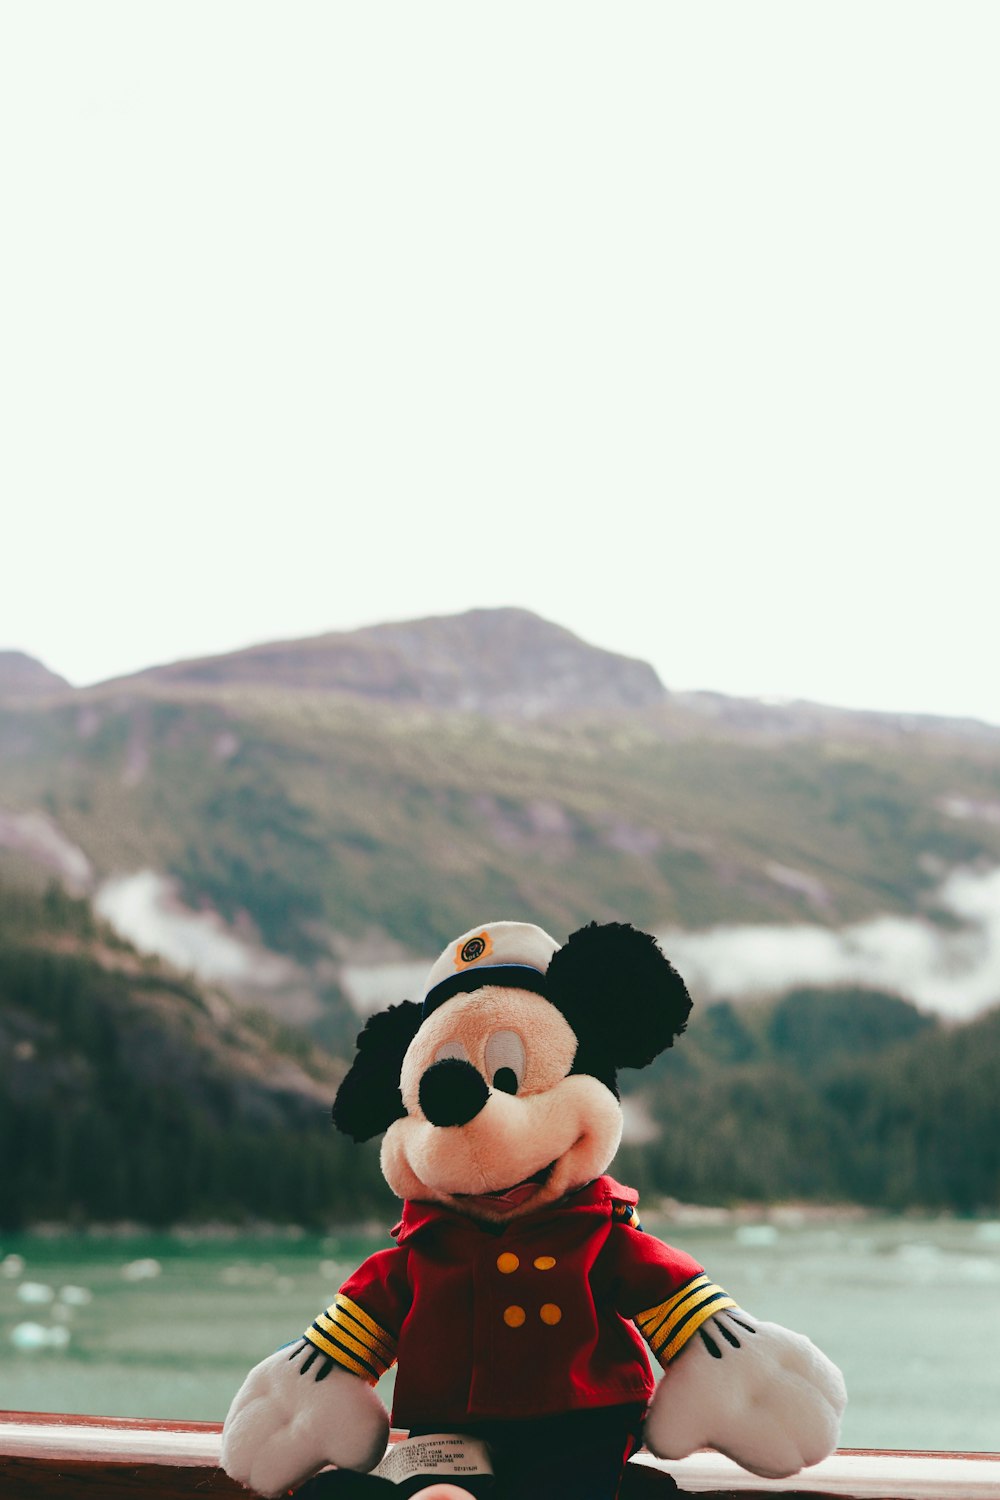 Mickey-Mouse plush toy